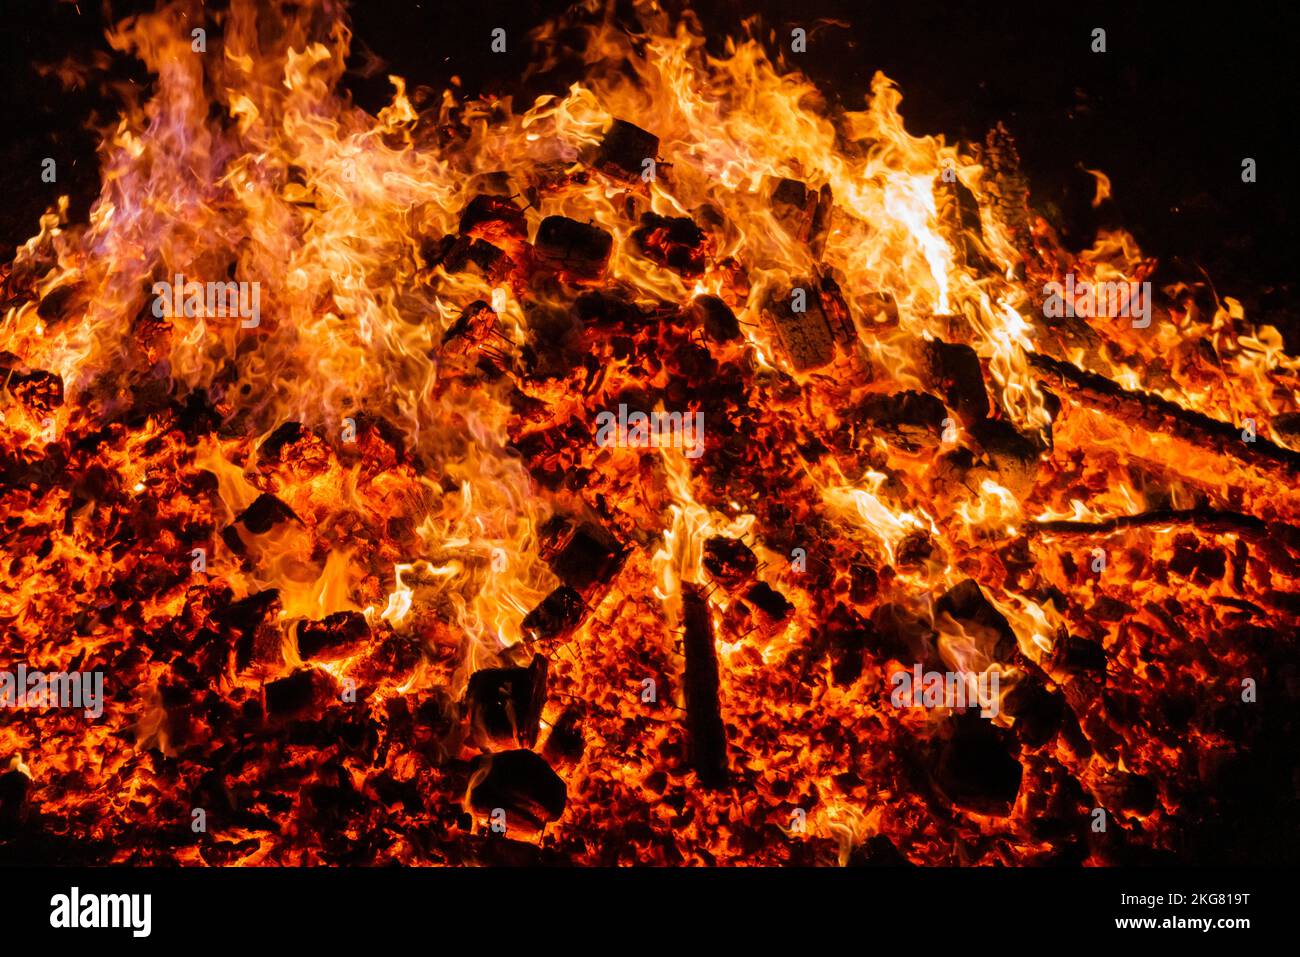 Burning coals from a fire abstract background. Stock Photo